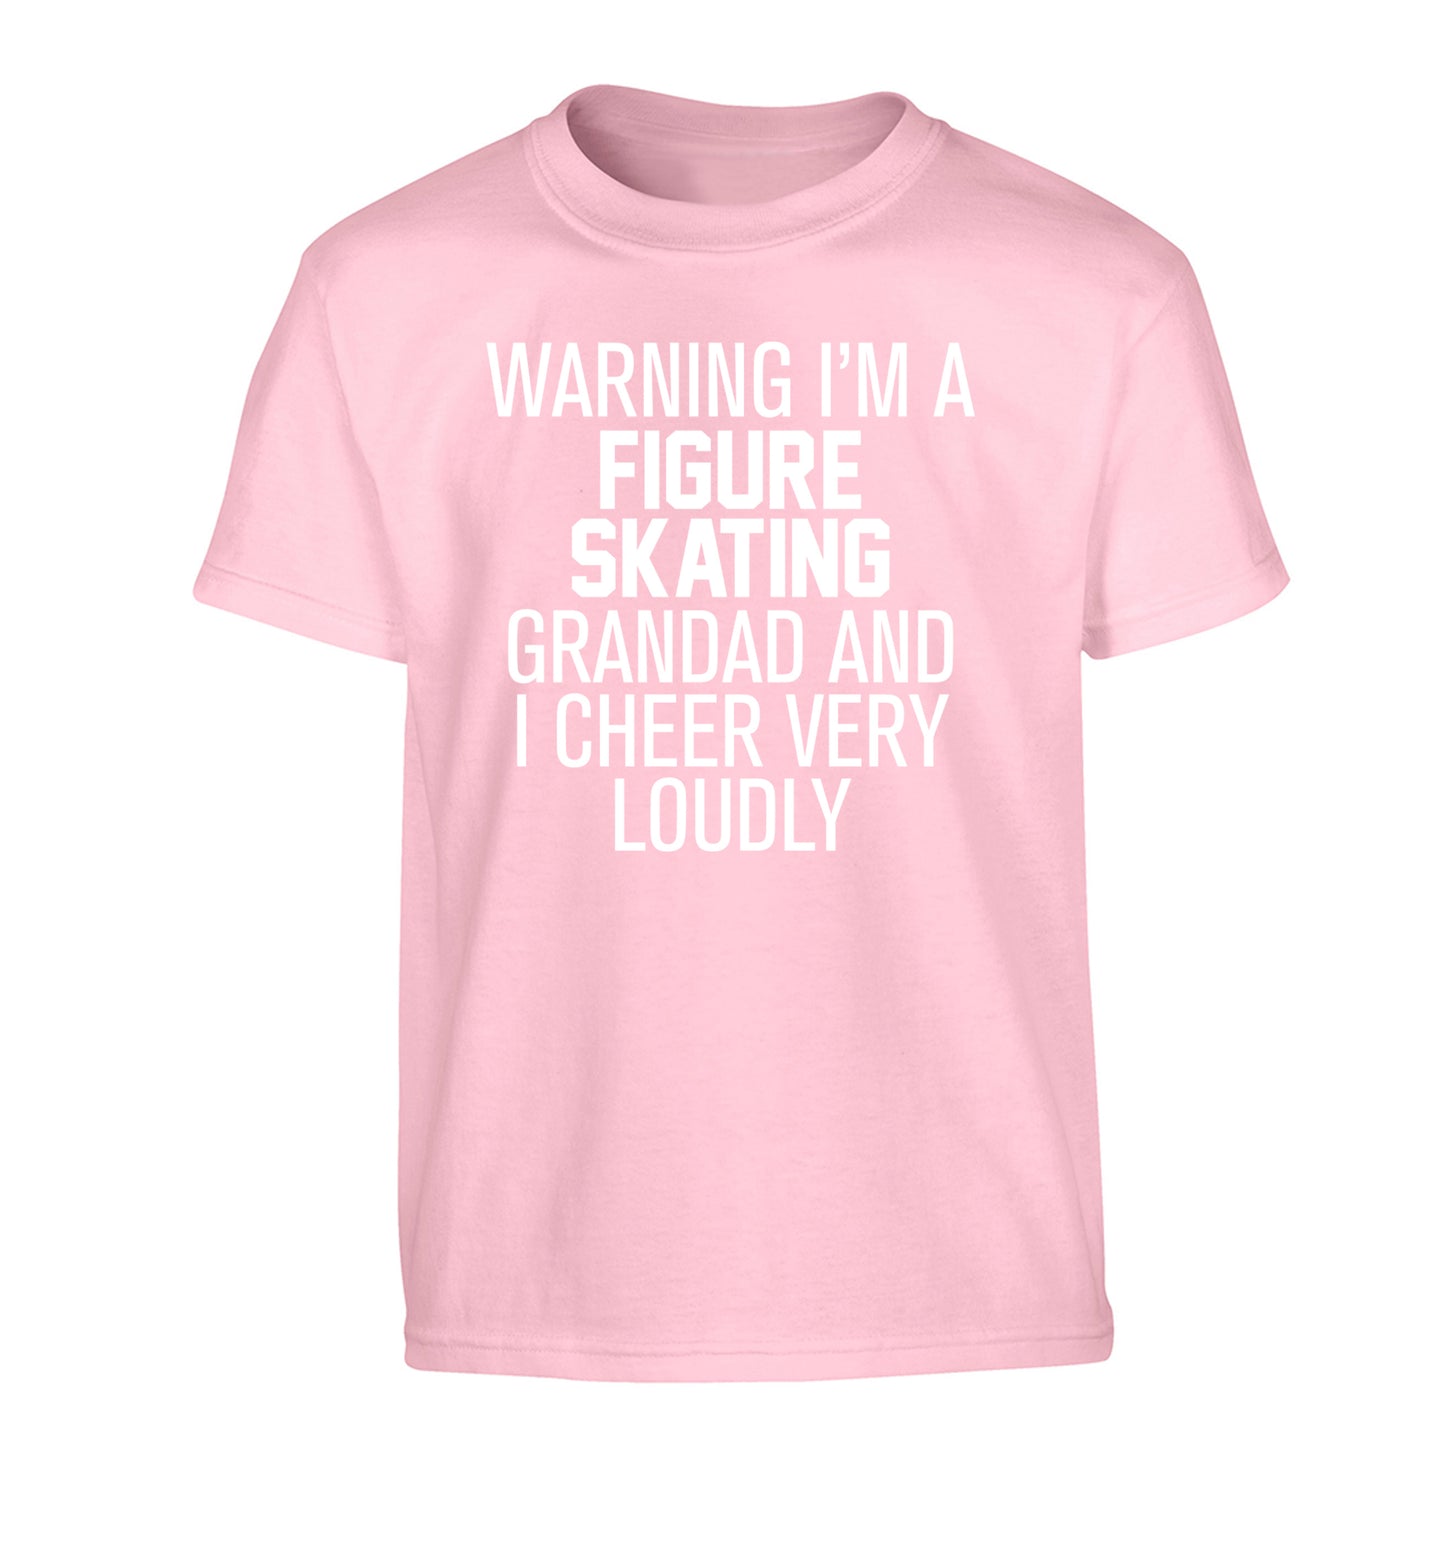 Warning I'm a figure skating grandad and I cheer very loudly Children's light pink Tshirt 12-14 Years